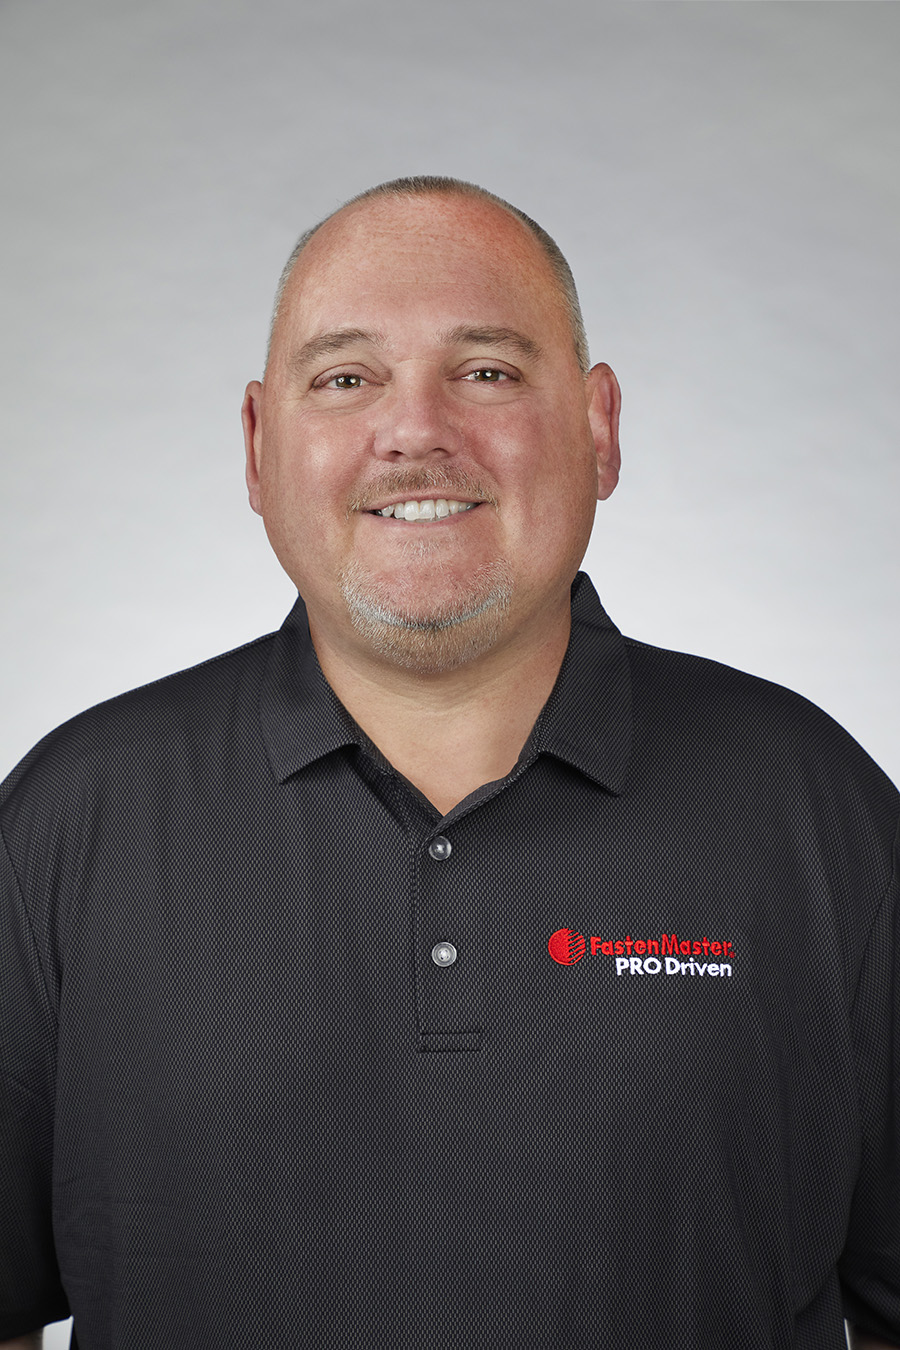 OMG, Inc., a Steel Partners Company (NYSE: SPLP), and a leading manufacturer of fasteners, adhesives, and construction productivity tools, has named Jeffrey Gelinas as manager of sales training for its FastenMaster and Roofing Products Divisions.